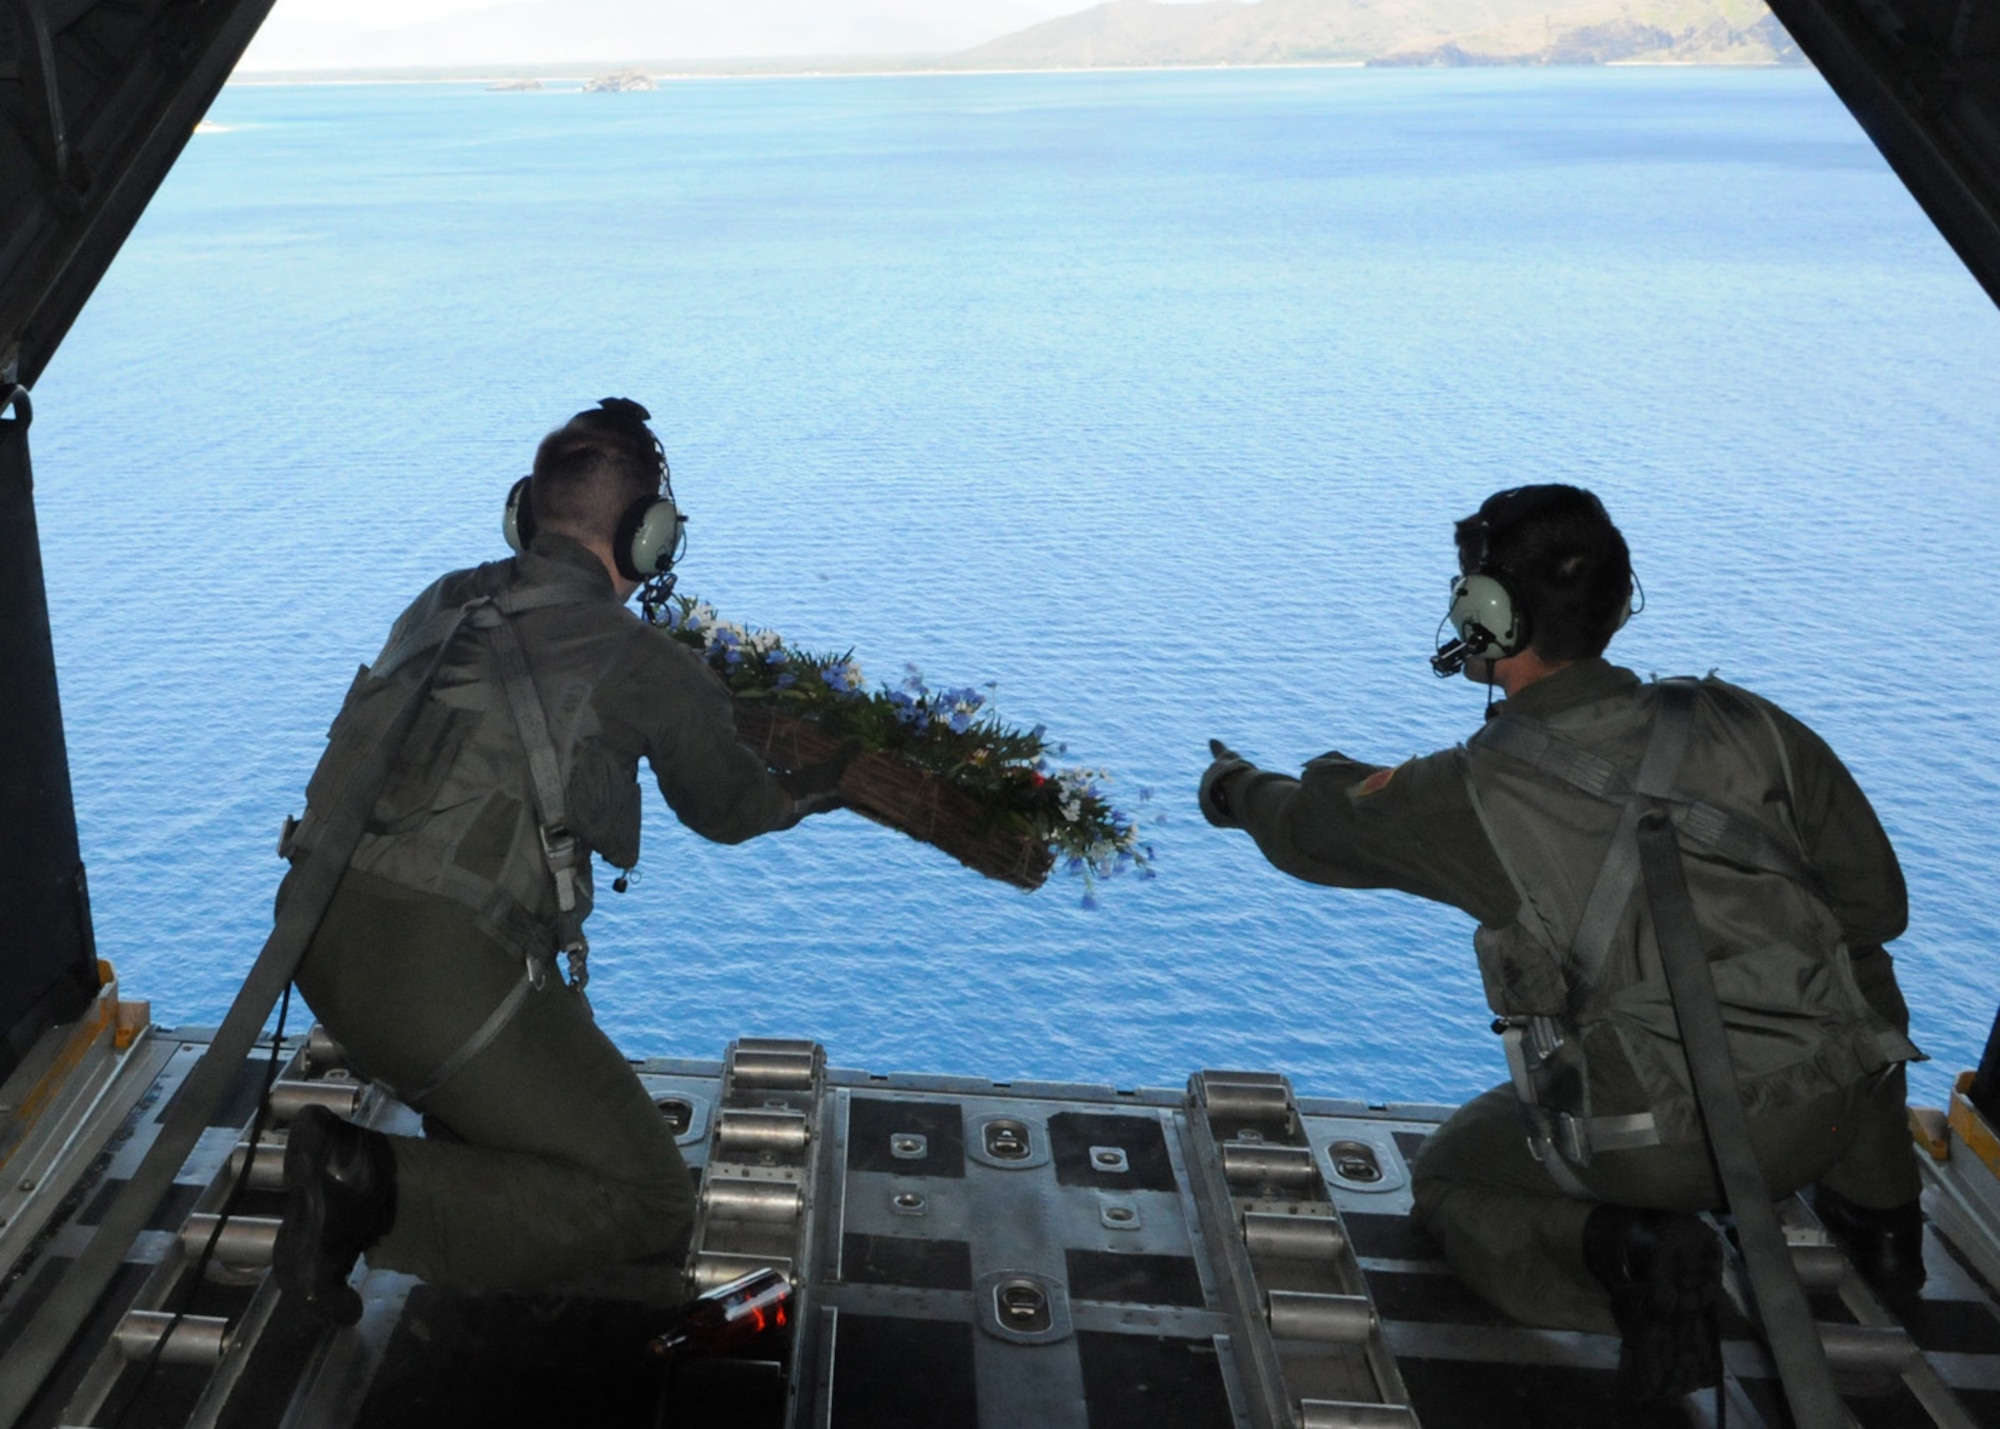 NEAR CAPONES ISLAND, Philippines -- Staff Sgts. Nicholas Adams (left) and Steve Pressler, 1st Special Operations Squadron loadmasters, release a memorial wreath out the back of a MC-130H Combat Talon II Feb. 26 to honor fallen brethren that were lost 28 years ago when a 1st SOS MC-130E, call sign STRAY59, crashed during an exercise killing eight crew members and 15 passengers. The crew of GOOSE99 flew from Kadena Air Base to reach the exact coordinates of the crash site to release the ceremonial wreath. The memorial flight has been flown every year since the tragic accident in 1981. (U.S. Air Force photo by Tech. Sgt. Aaron Cram)